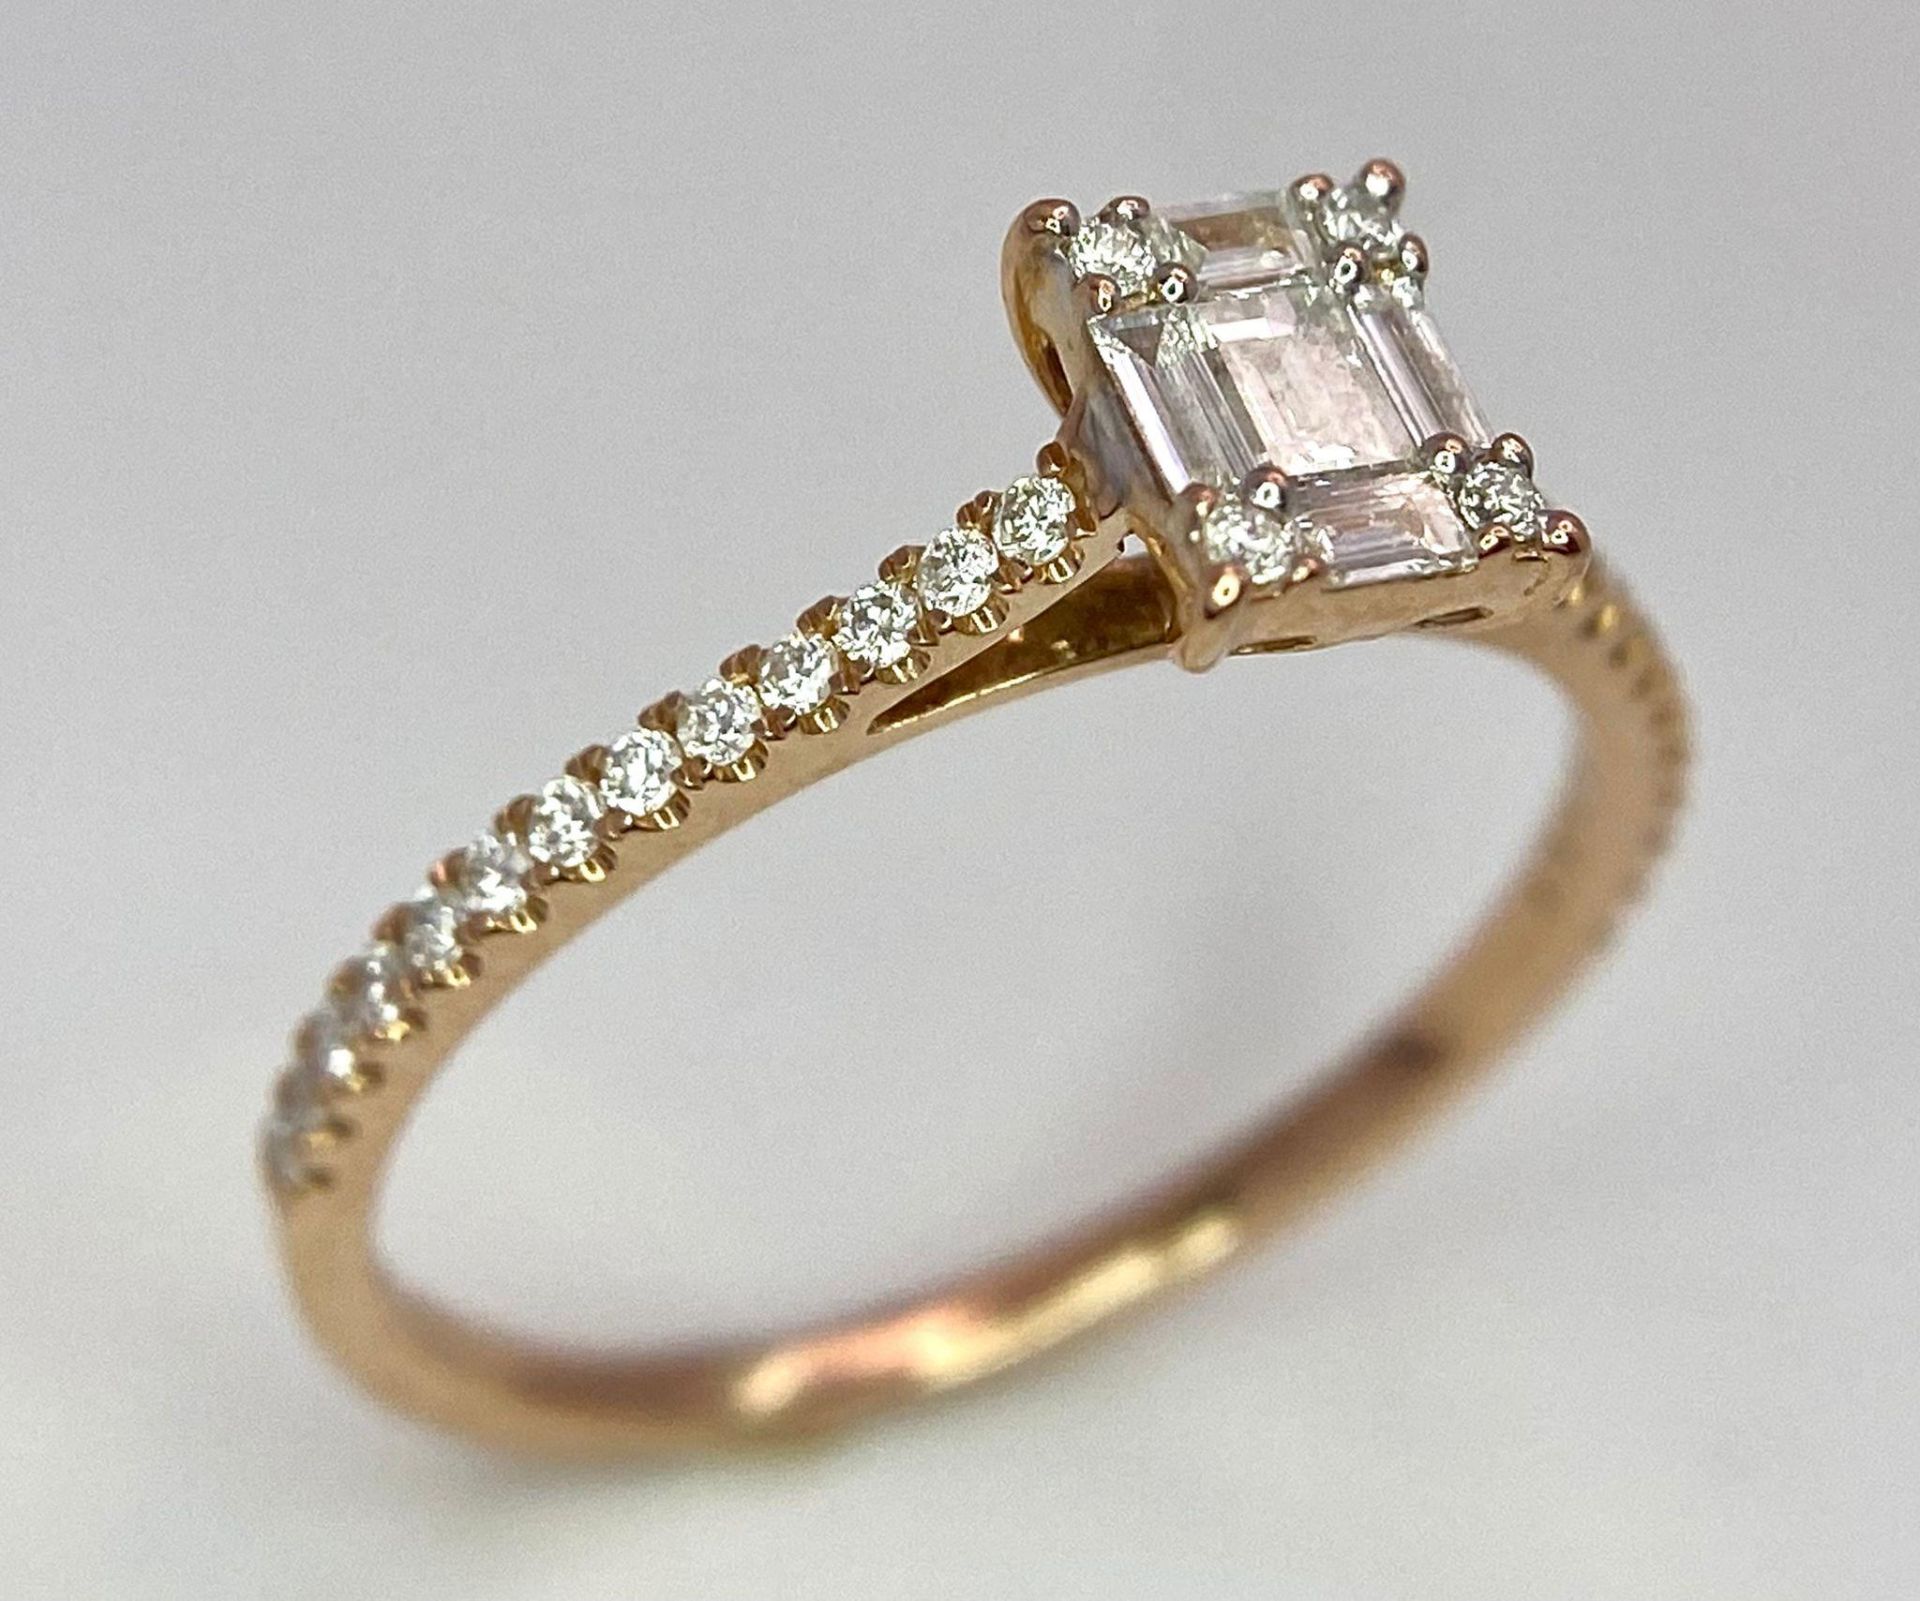 An 18 K rose gold ring with a square emerald cut diamond and more round cut diamonds on the - Image 3 of 8